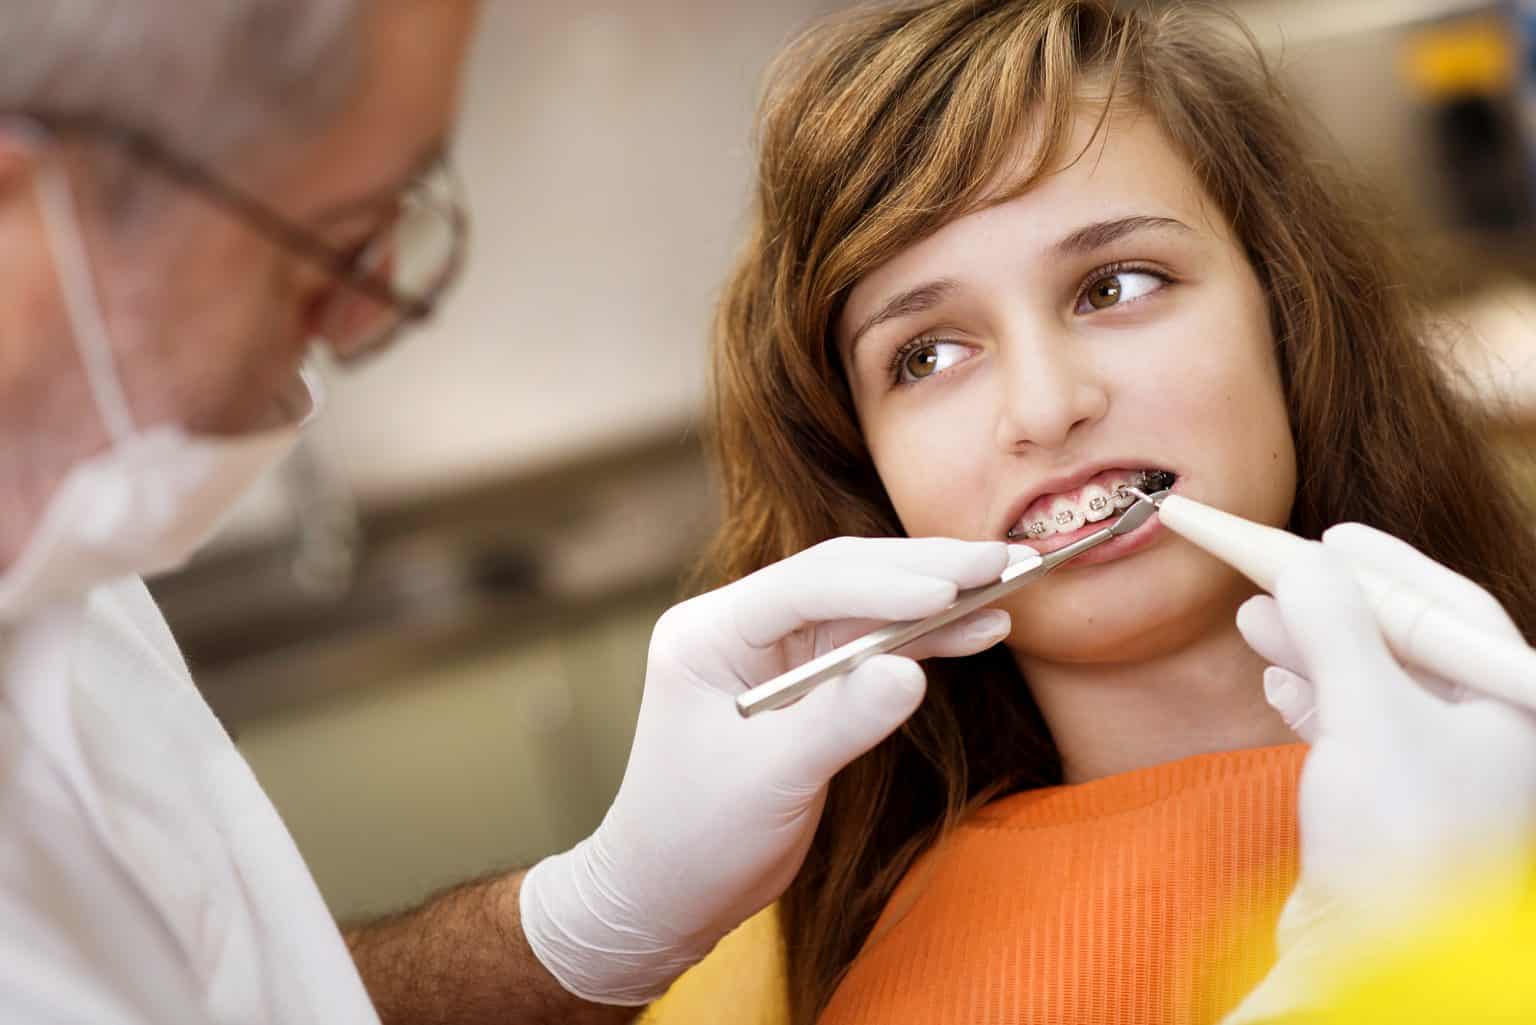 How Long Will My Teeth Hurt After My Braces Are Tightened?